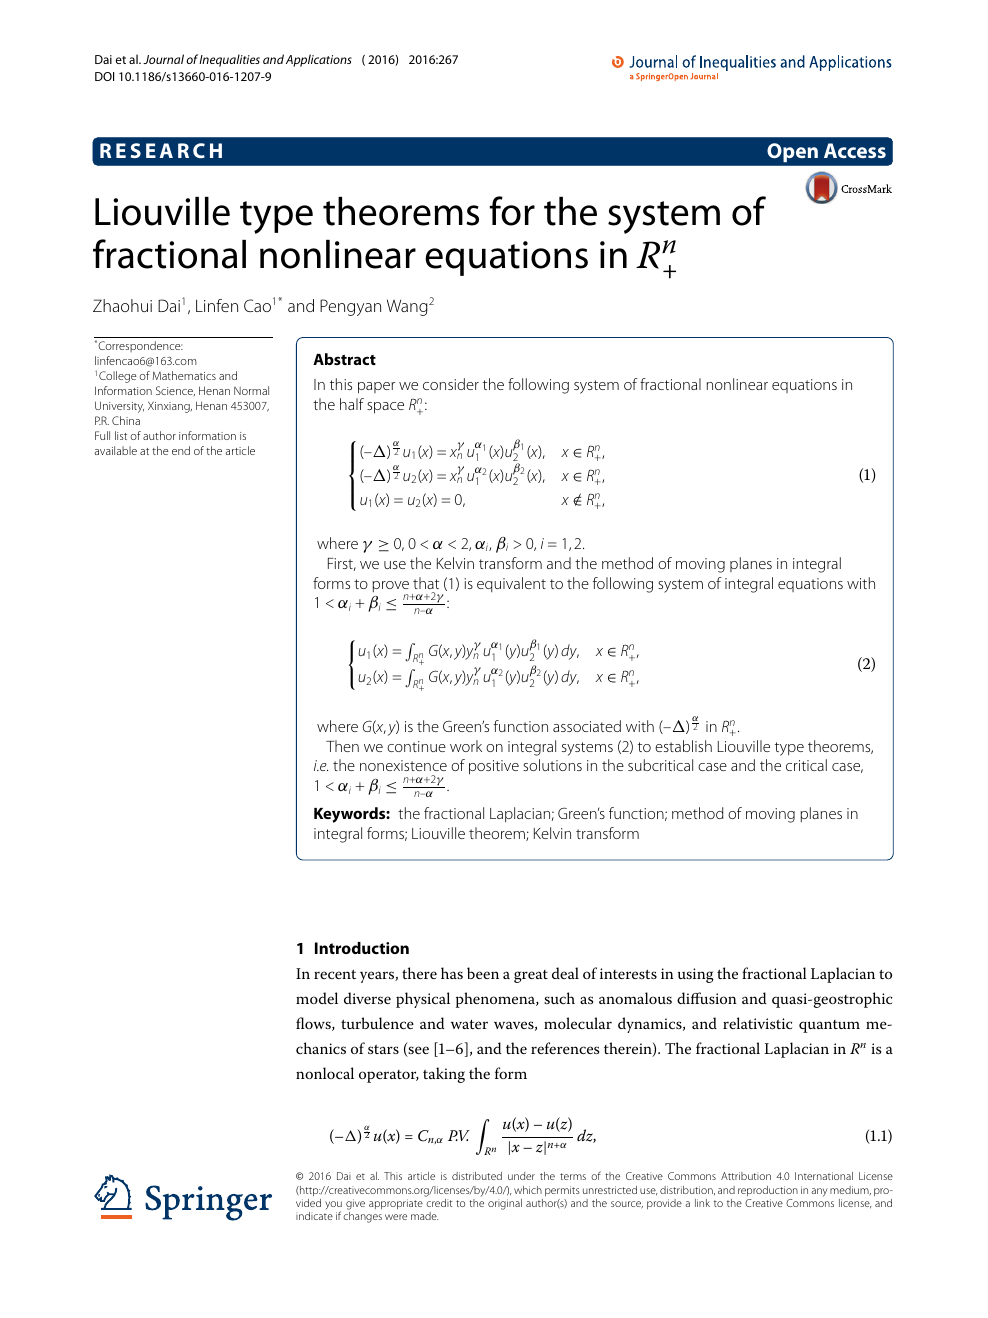 Liouville Type Theorems For The System Of Fractional Nonlinear Equations In R N R N Topic Of Research Paper In Mathematics Download Scholarly Article Pdf And Read For Free On Cyberleninka